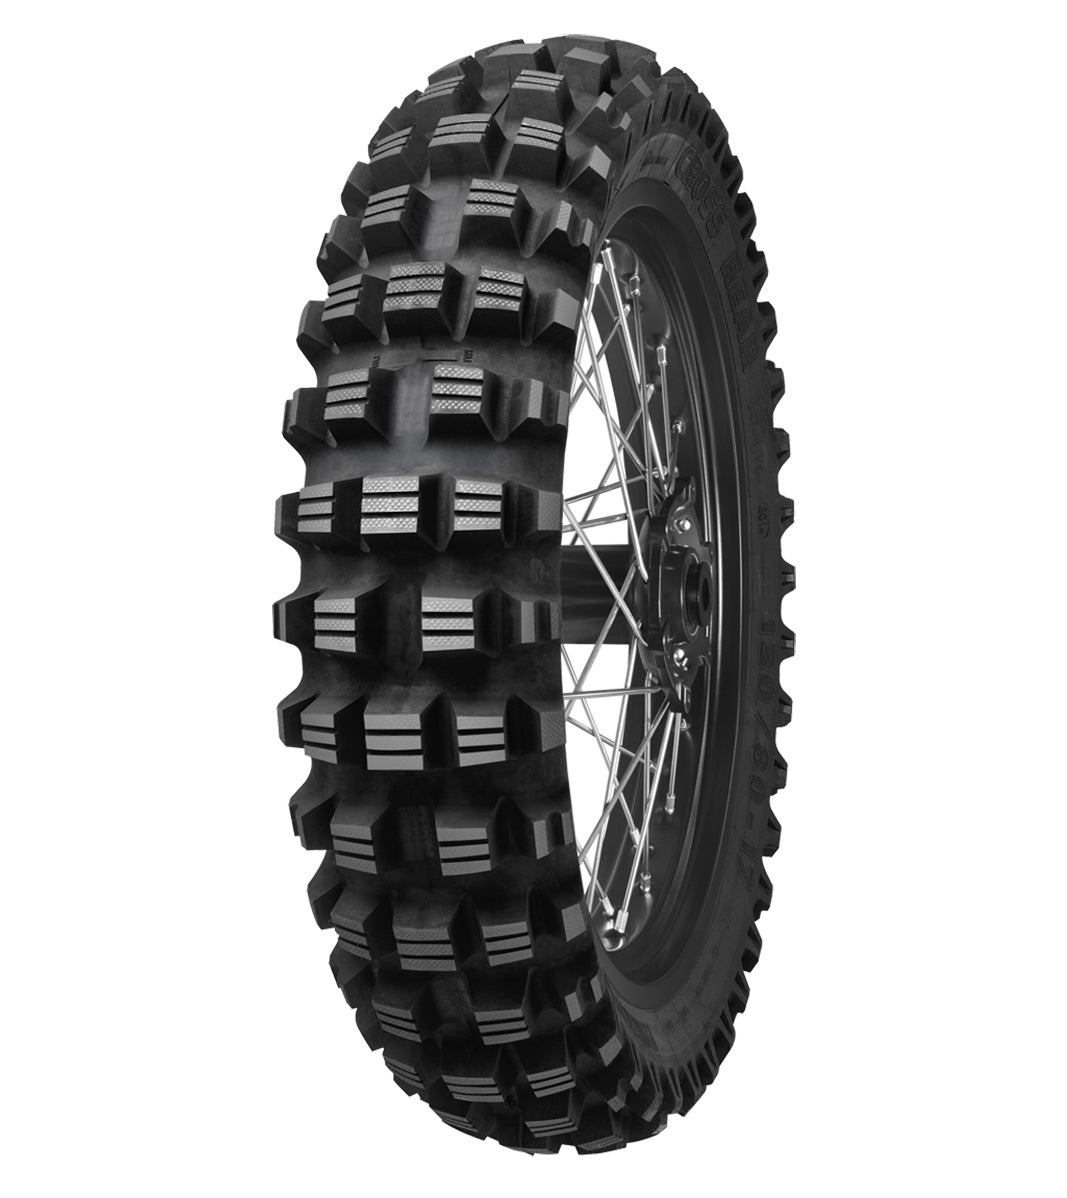 Mitas C-02 STONE KING 120/90-18 All-Terrain Off-Road 71N No Stripe Tube Rear Tire, 226362, 120/90-18, All-Terrain, C-02 Stone King, Off-Road, Rear, Tires - Imported and distributed in North &amp; South America by Lindeco Genuine Powersports - Premier Powersports Equipment and Accessories for Motorcycle Enthusiasts, Professional Riders and Dealers.